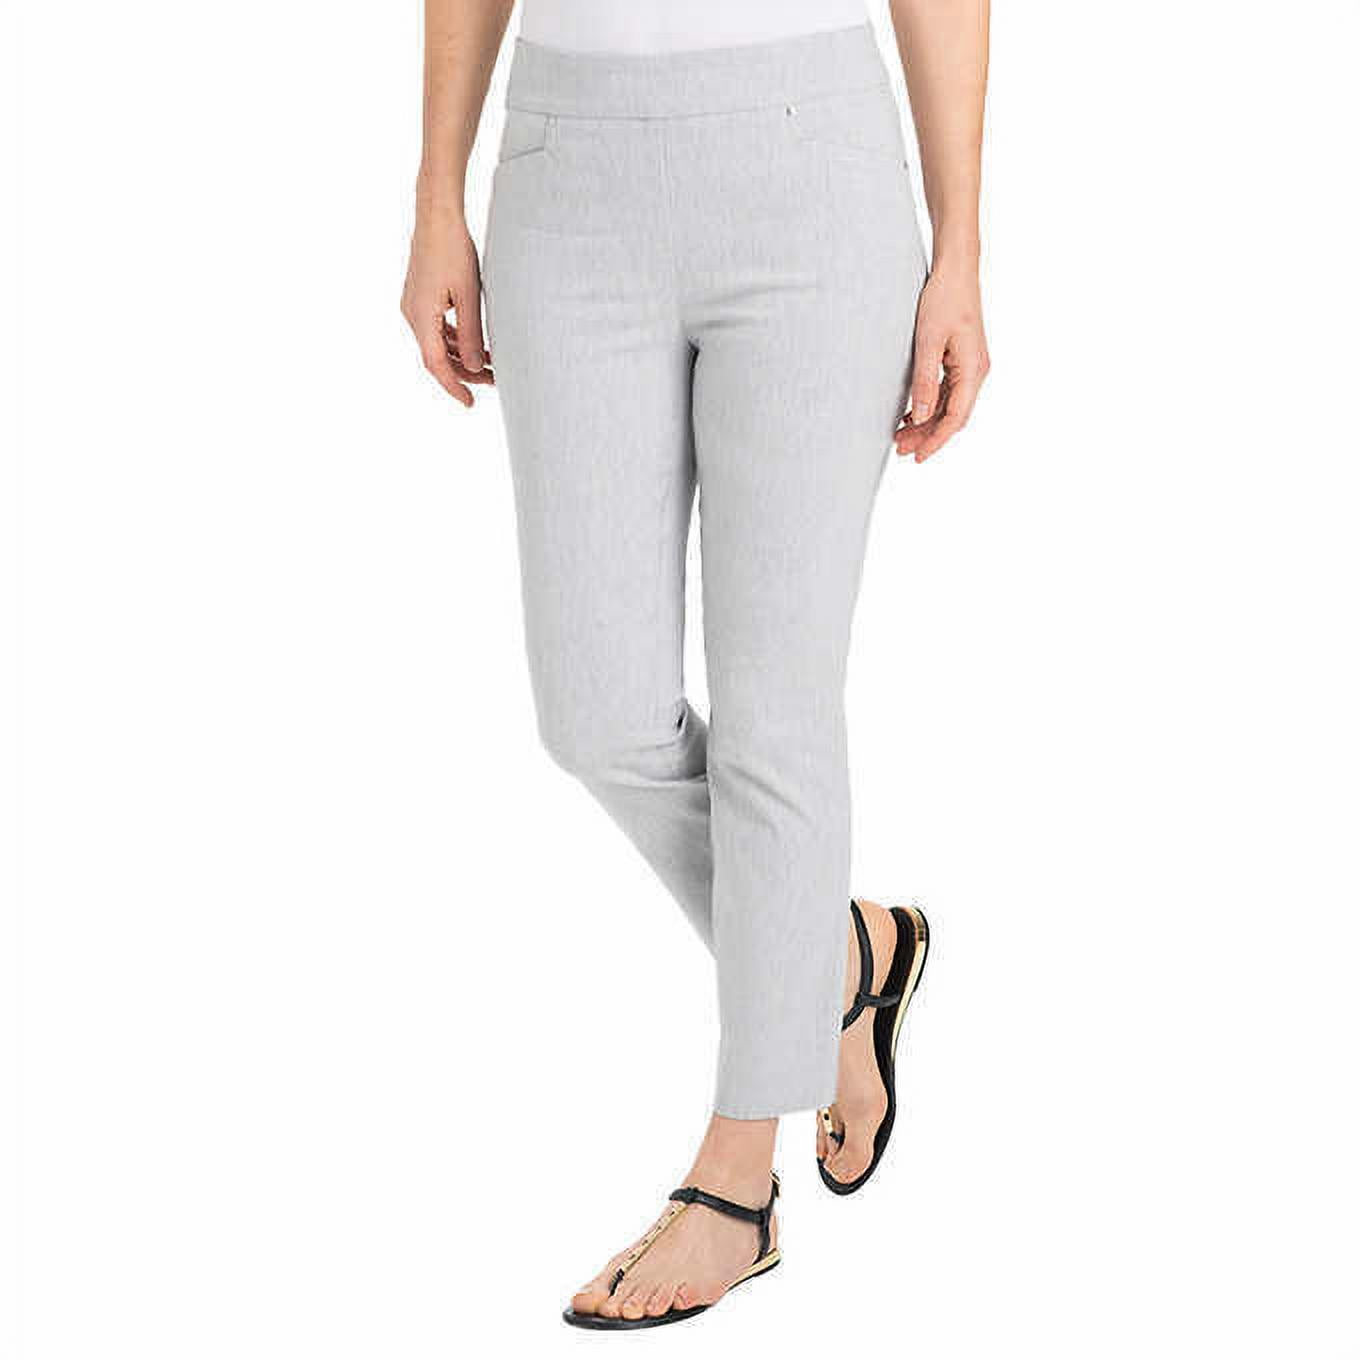 Get Monotone Checkered Ankle Pants With Pockets at ₹ 699 | LBB Shop